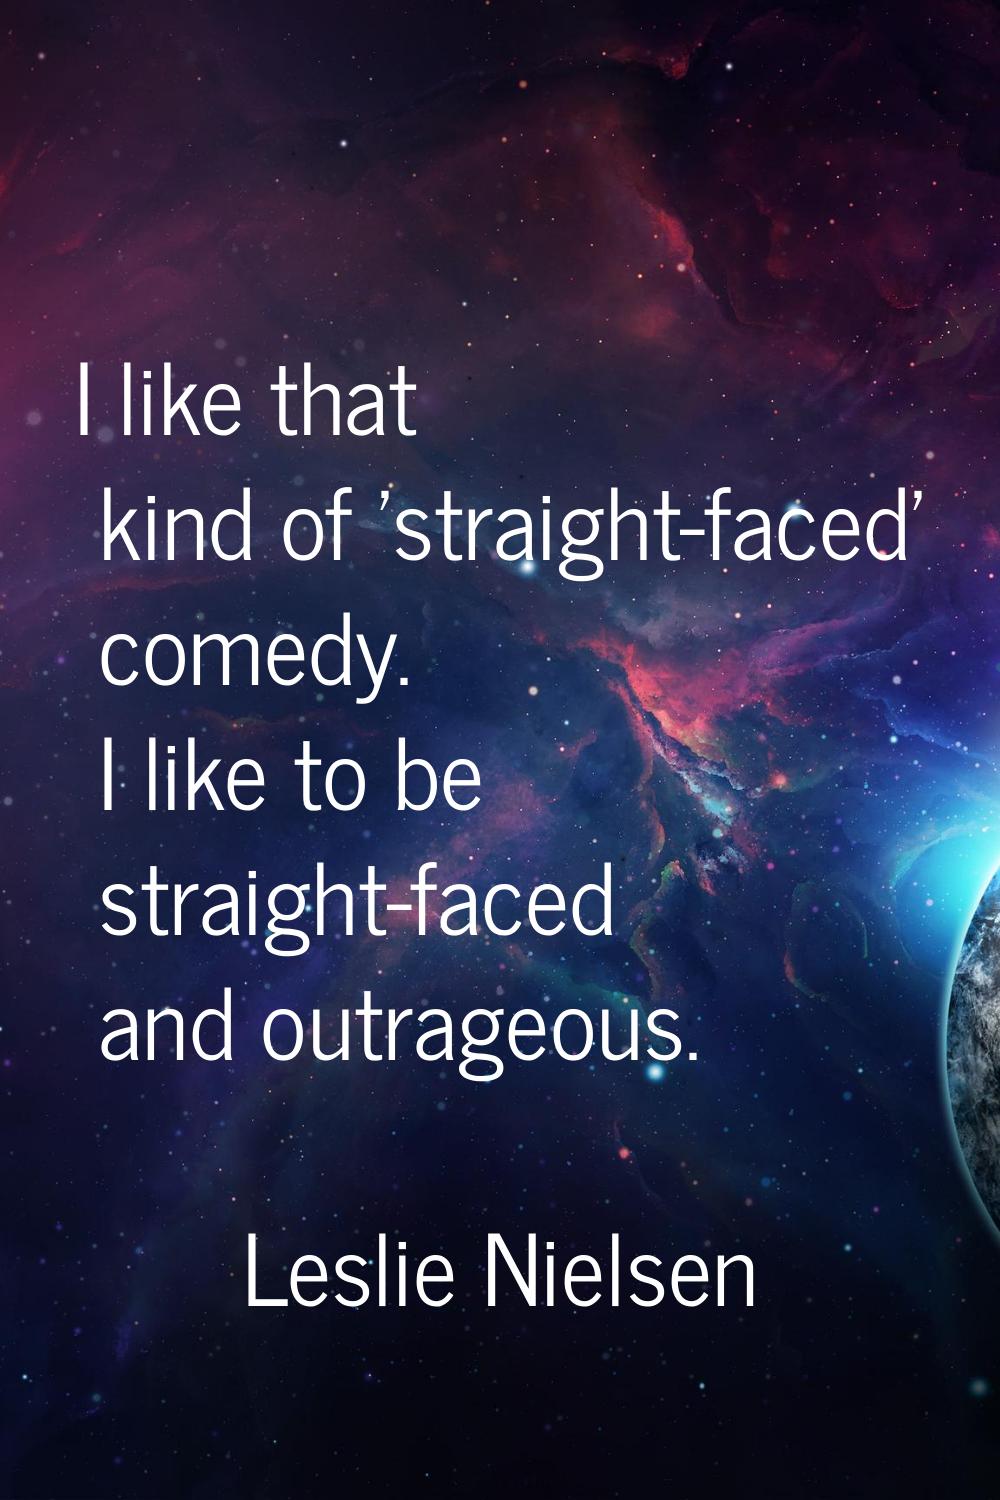 I like that kind of 'straight-faced' comedy. I like to be straight-faced and outrageous.